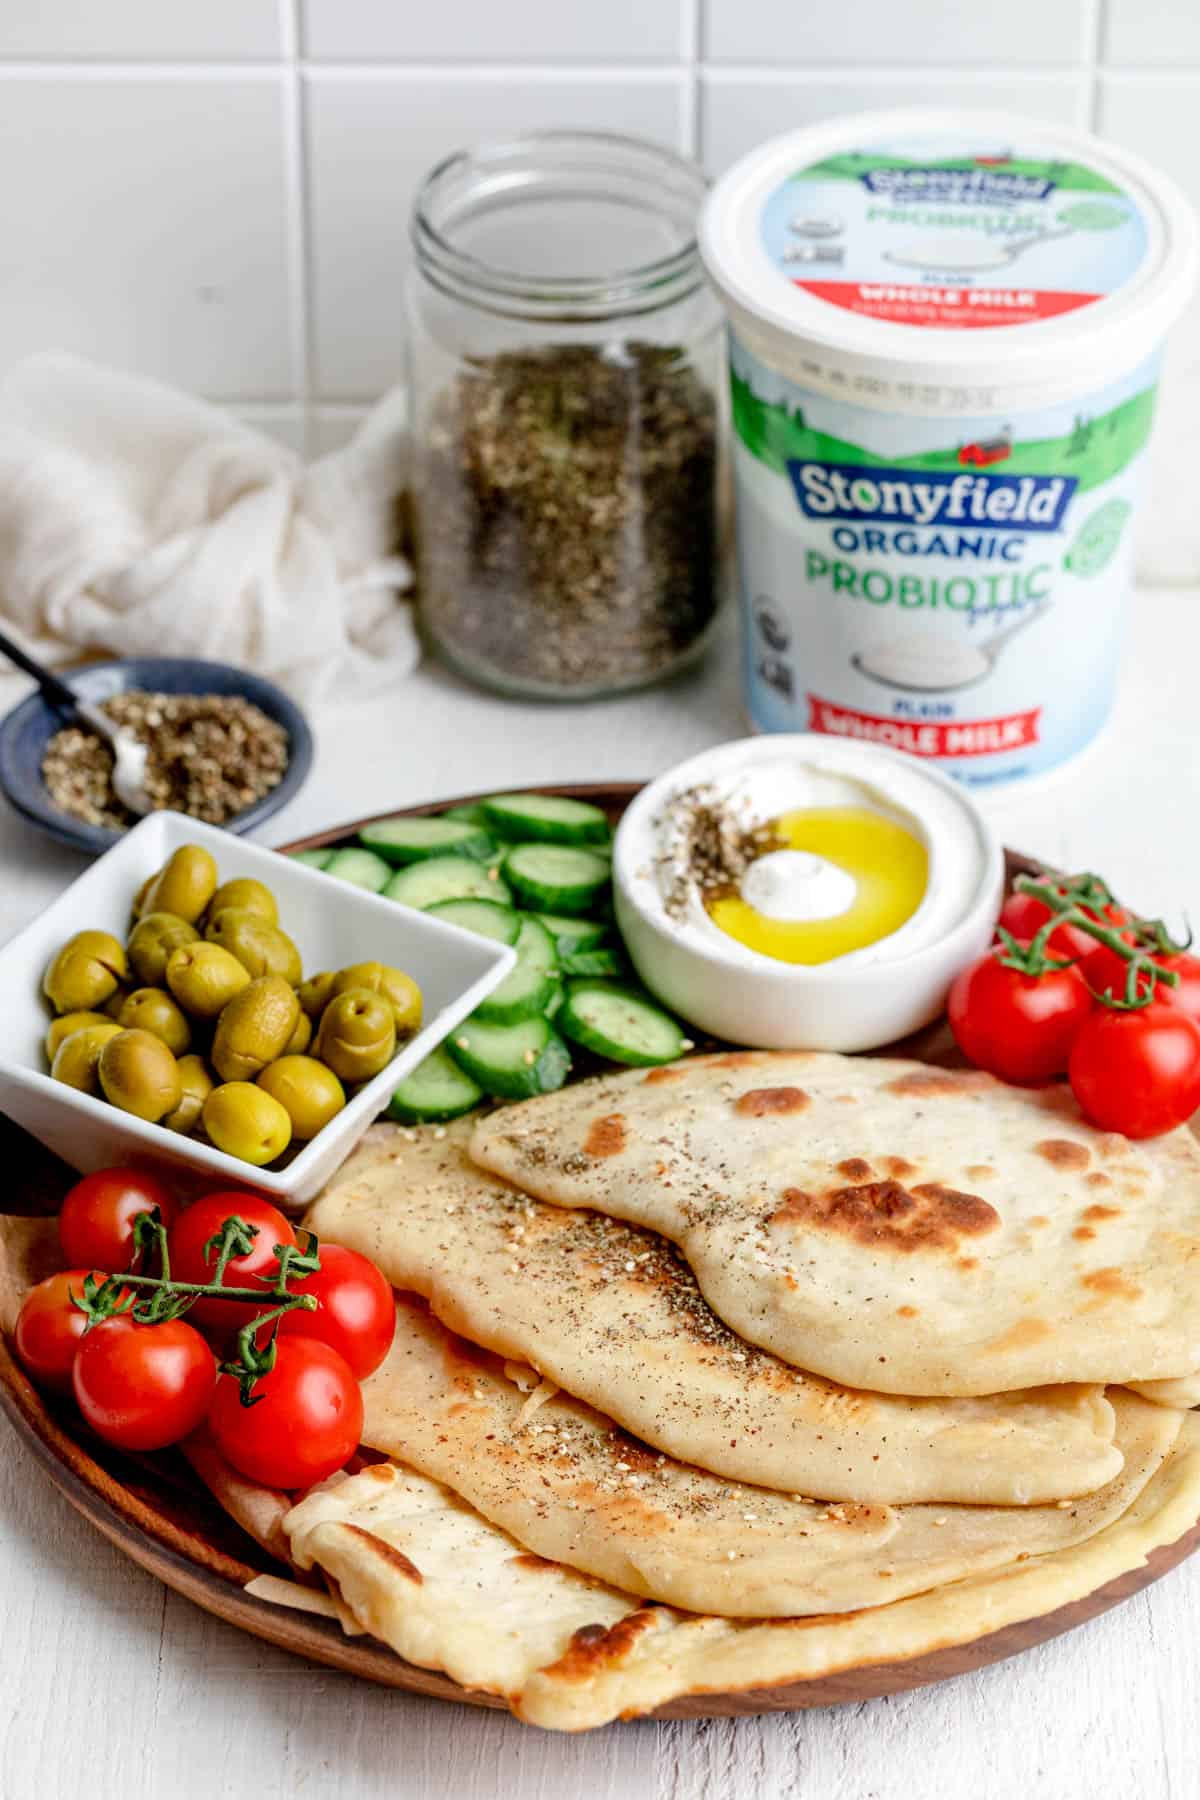 Wooden tray of yogurt flatbread with vegetables and labneh dip, with Stonyfield yogurt in background and zaatar